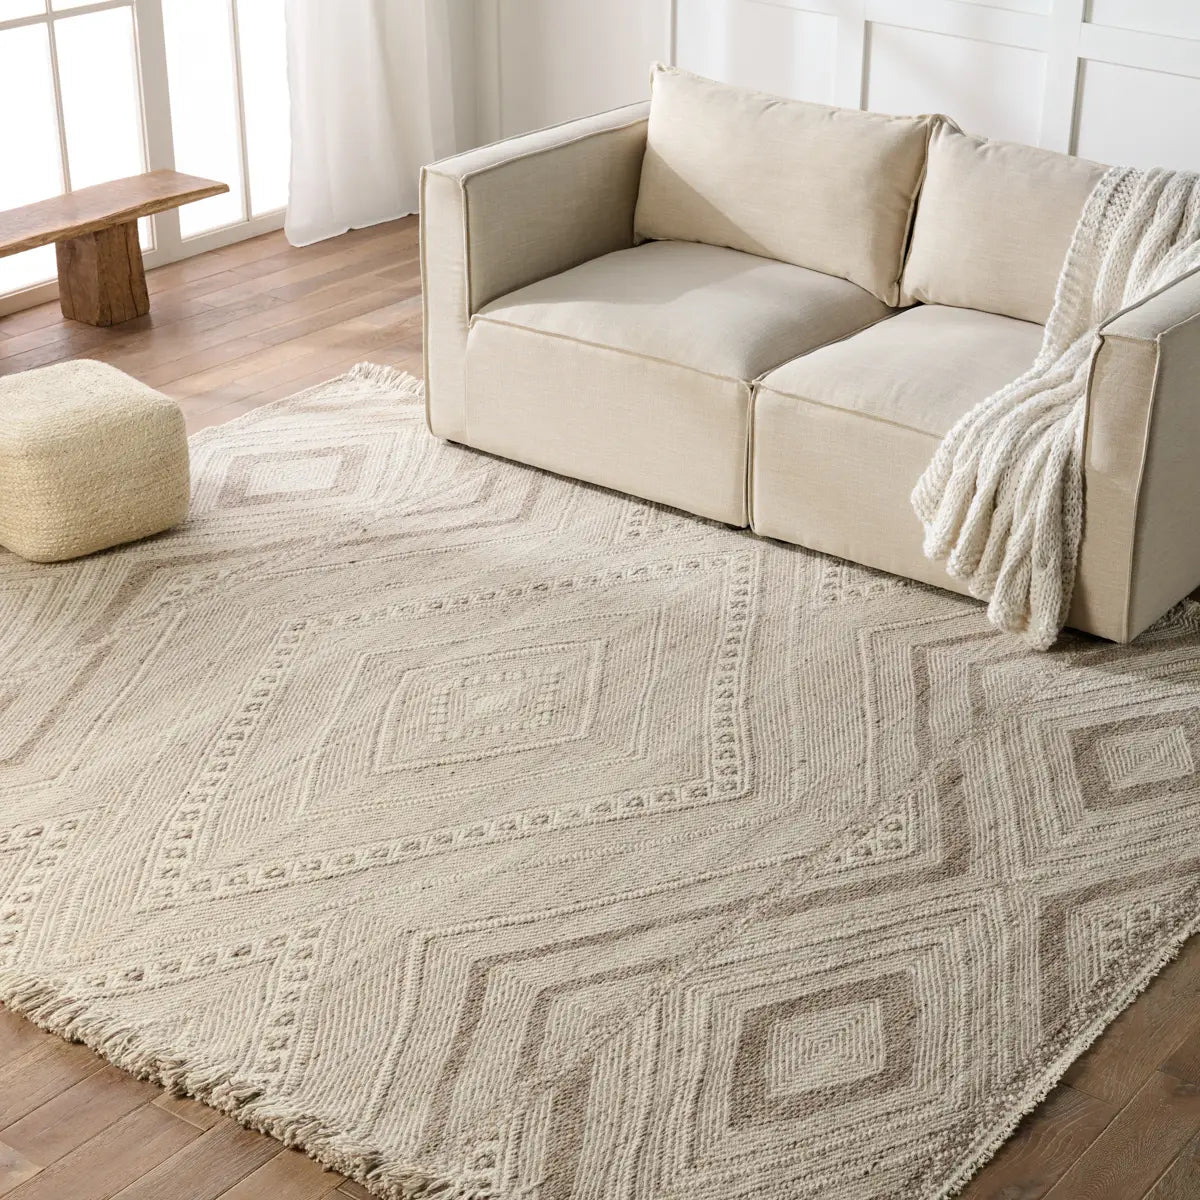 The handwoven Satori Suriya Area Rug by Jaipur Living features a versatile, neutral palette and an intricate tribal and diamond pattern. The short fringe detail adds texture to this light brown and cream-colored piece. This Moroccan style area rug fits perfectly in high traffic areas. 